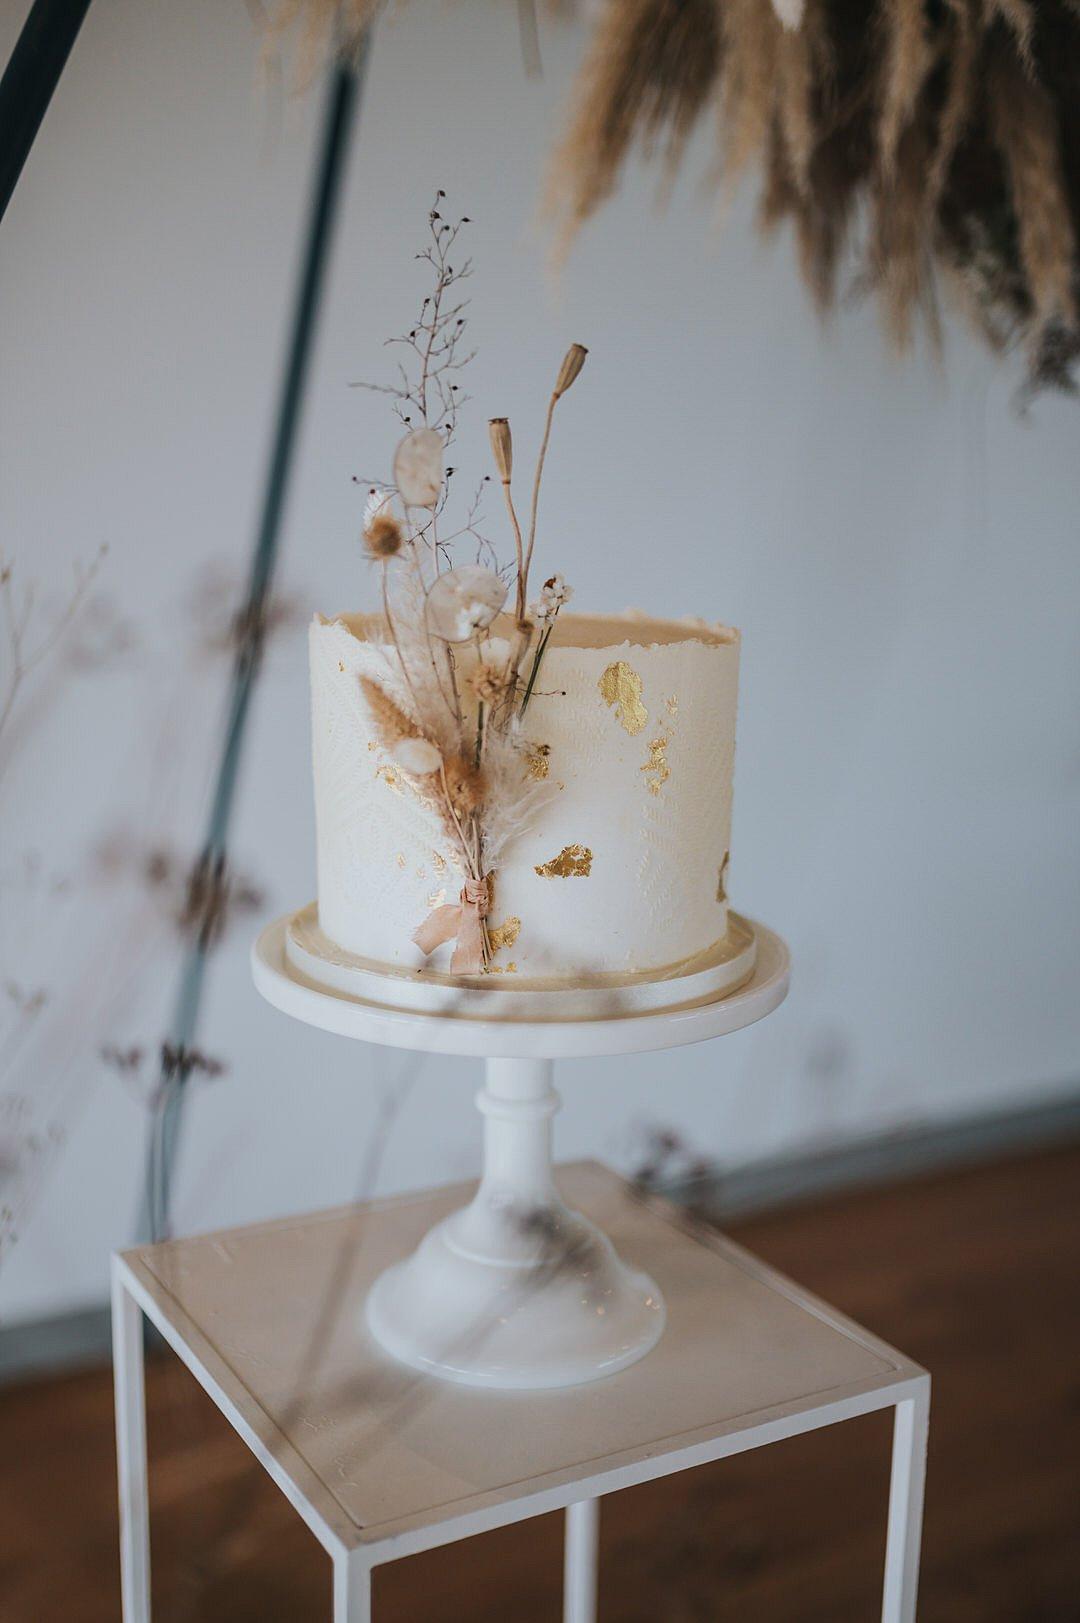 Rustic Wedding Cakes Archives - Rustic Wedding Chic